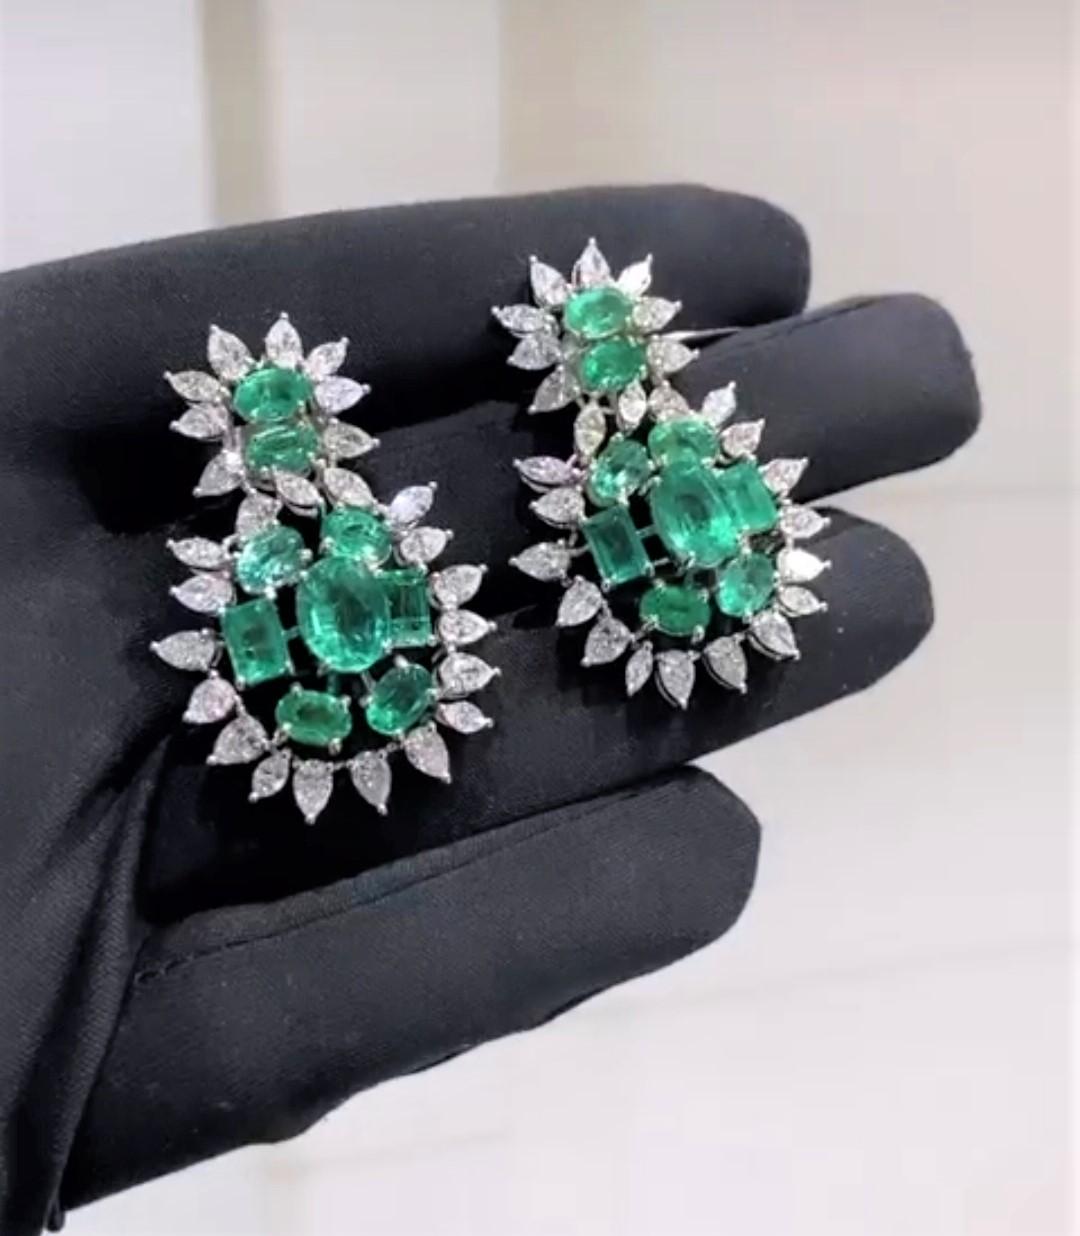 The Following Items we are offering is a Pair of Rare 18KT Gold Large Emerald Diamond Dangle Earrings. Earrings are comprised of Finely Set Gorgeous Large Gorgeous Green Emerald Diamond Earrings surrounded with Large Full Cut Fancy Marquise and Pear